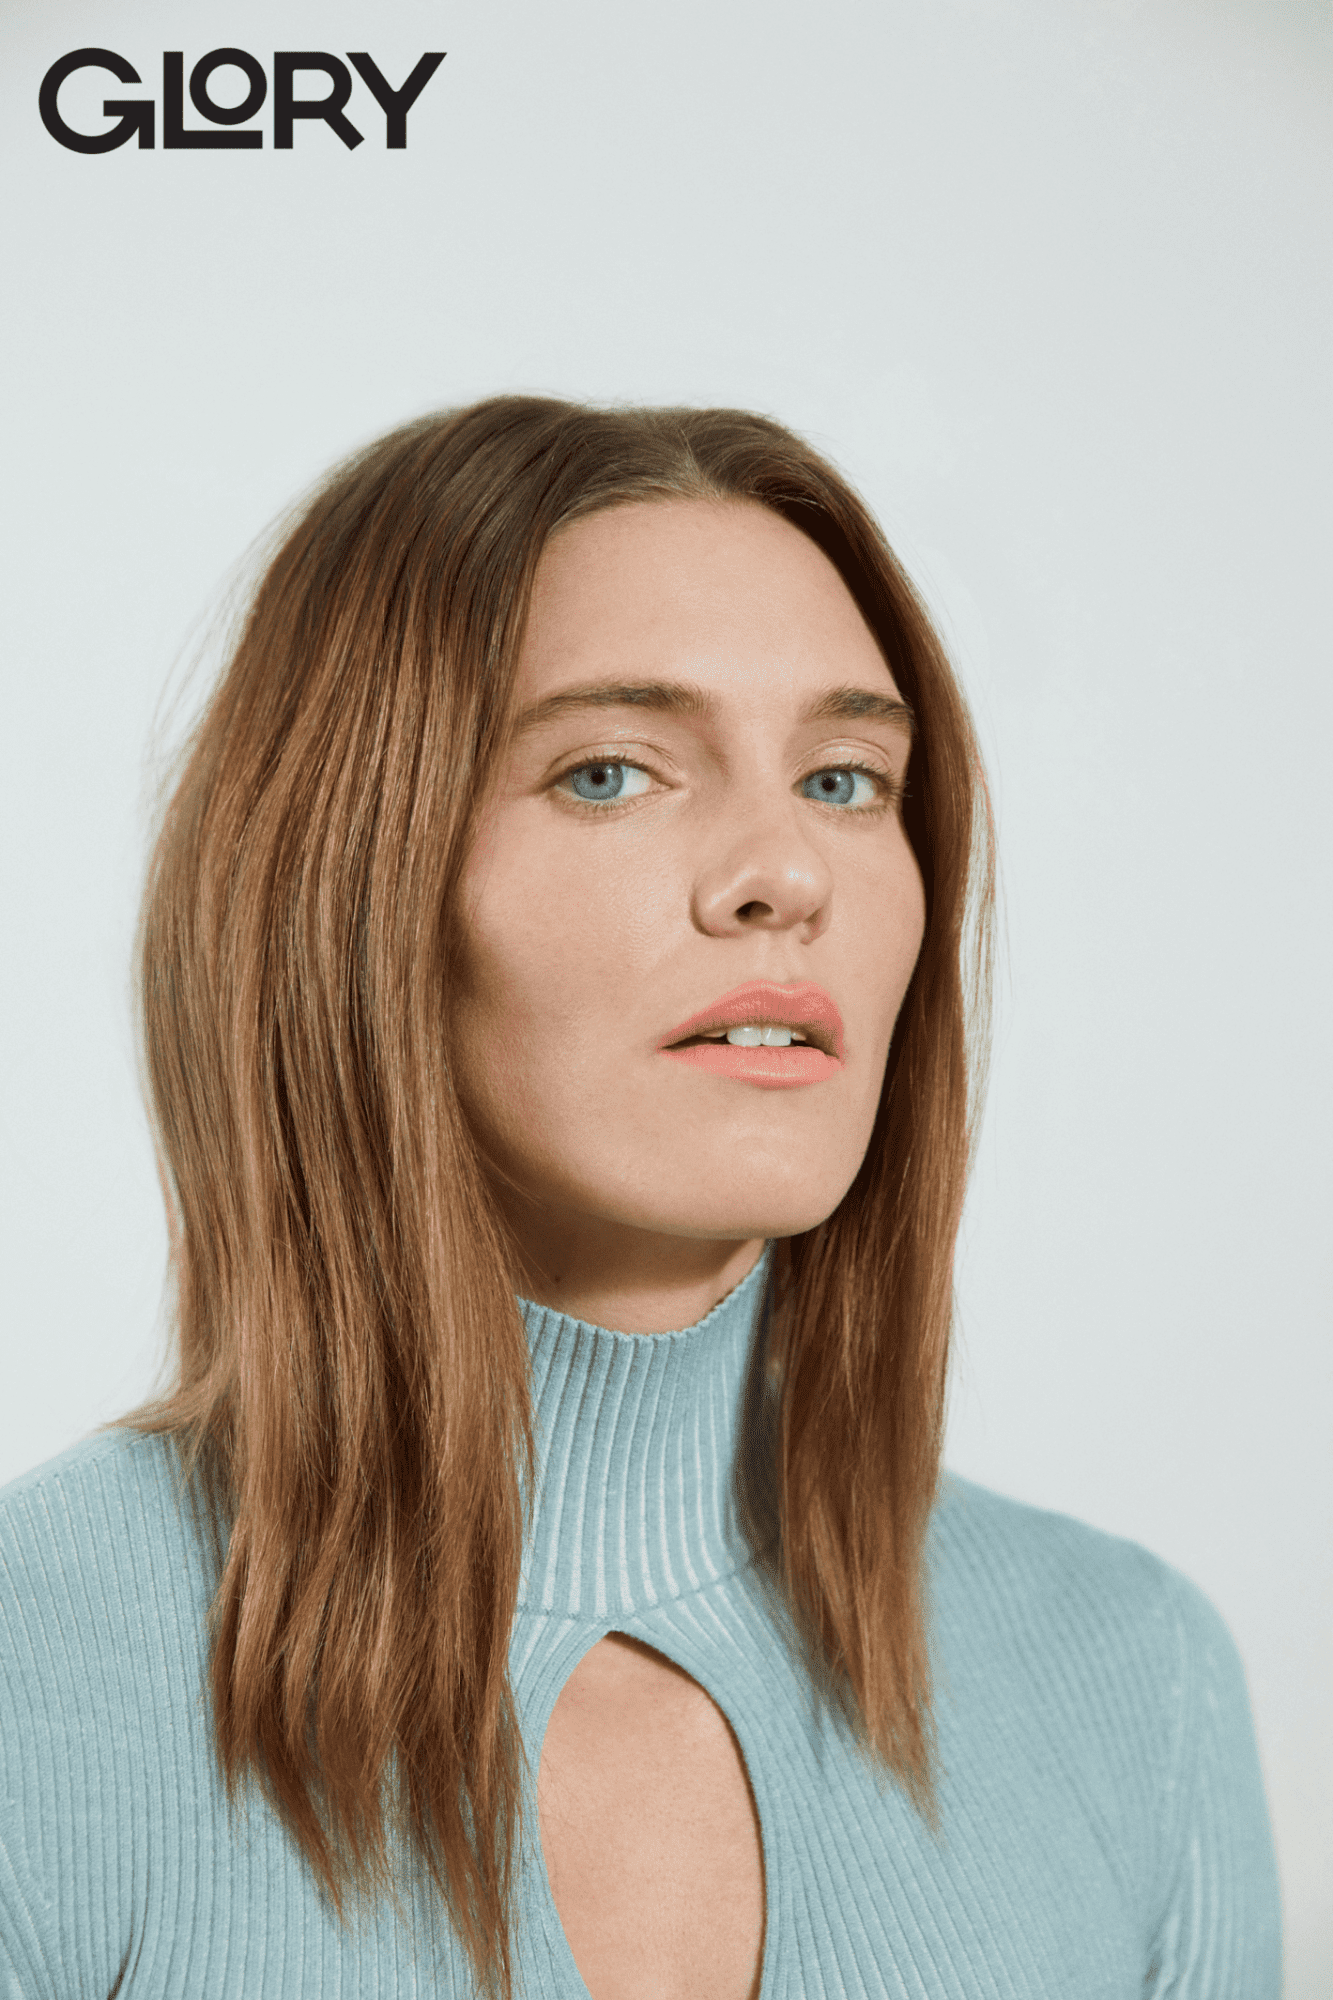 Portrait of Alysha Newman wearing a light blue knitted tunic with a keyhole cutout. Her hair is brown and she has striking blue eyes.